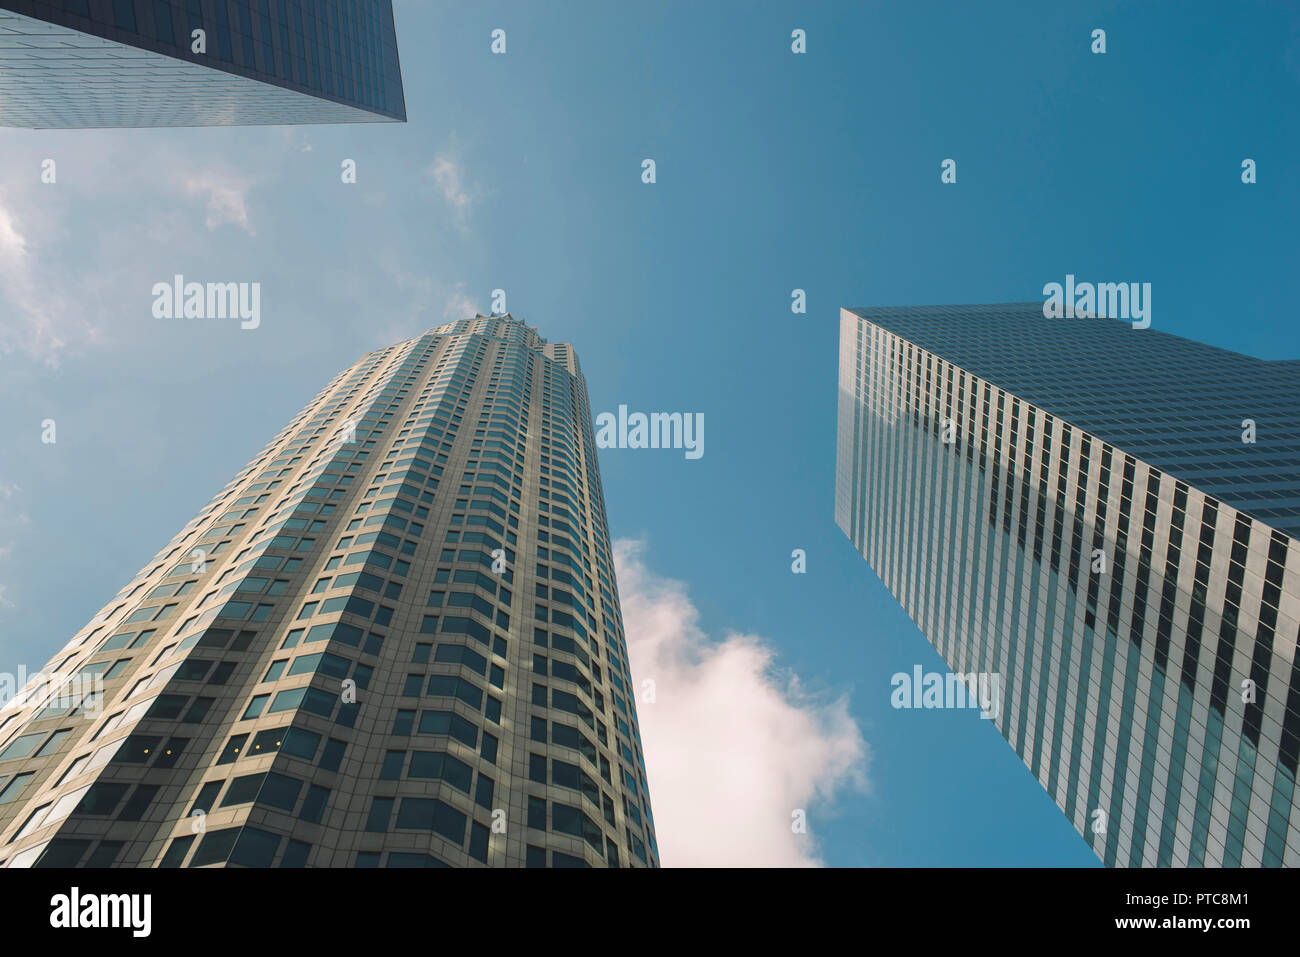 Group of tall city sky scrapers reach to the sky Stock Photo